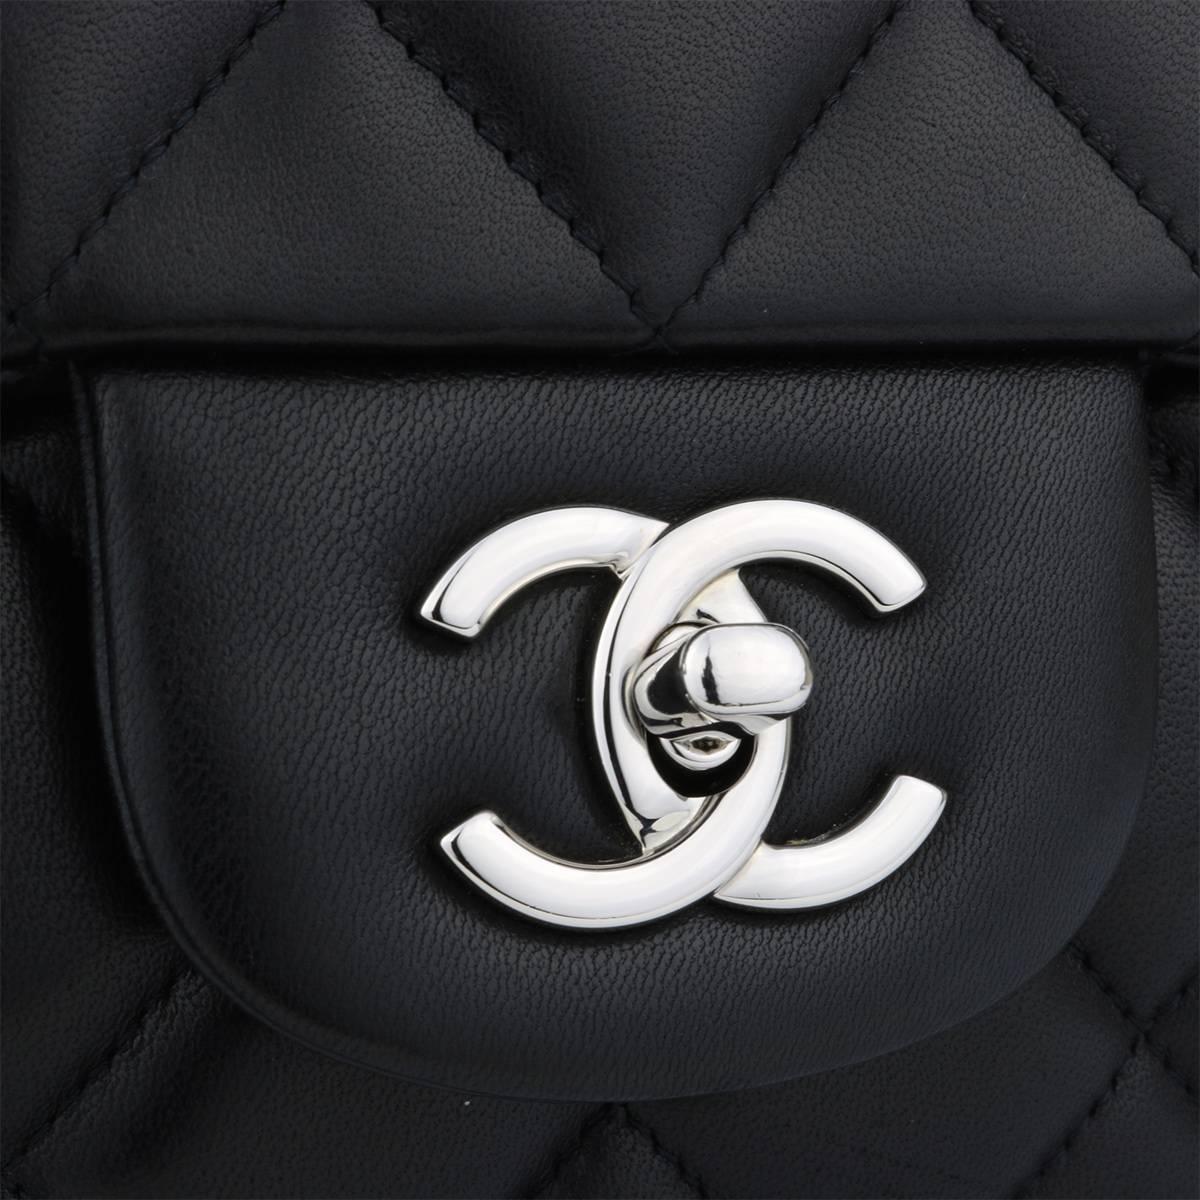 Authentic CHANEL Classic Single Flap Jumbo Black Lambskin with Silver Hardware 2009.

This stunning bag is in an excellent condition, the bag still holds the original shape and the hardware is still very shiny. Leather smells fresh as if